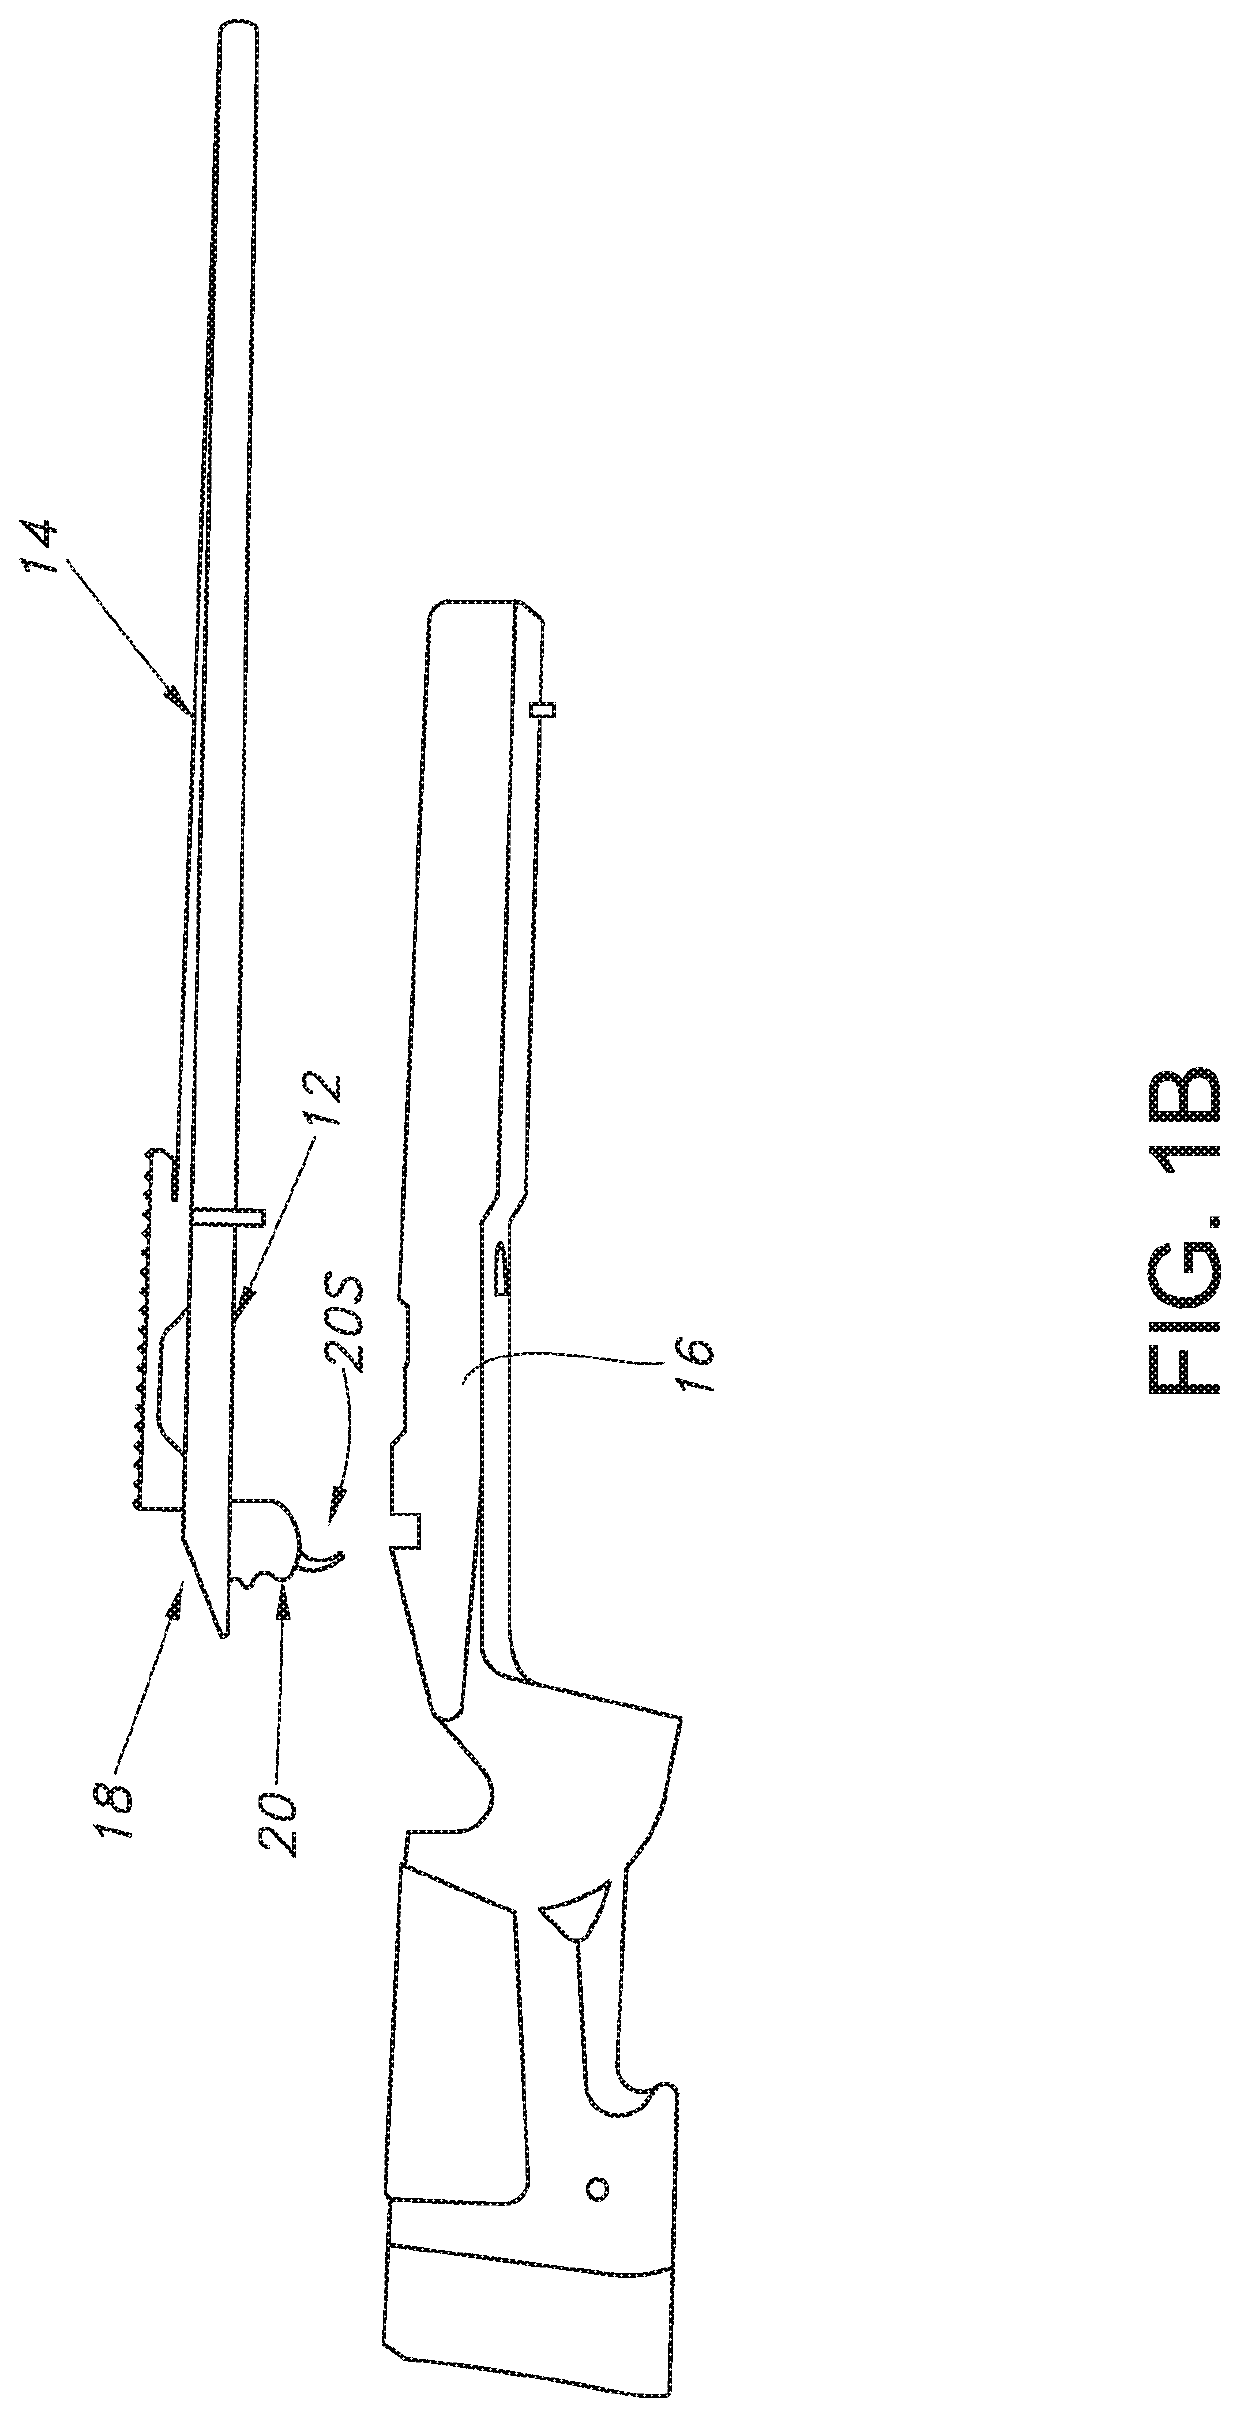 Non-contact electro-magnetic actuator and method